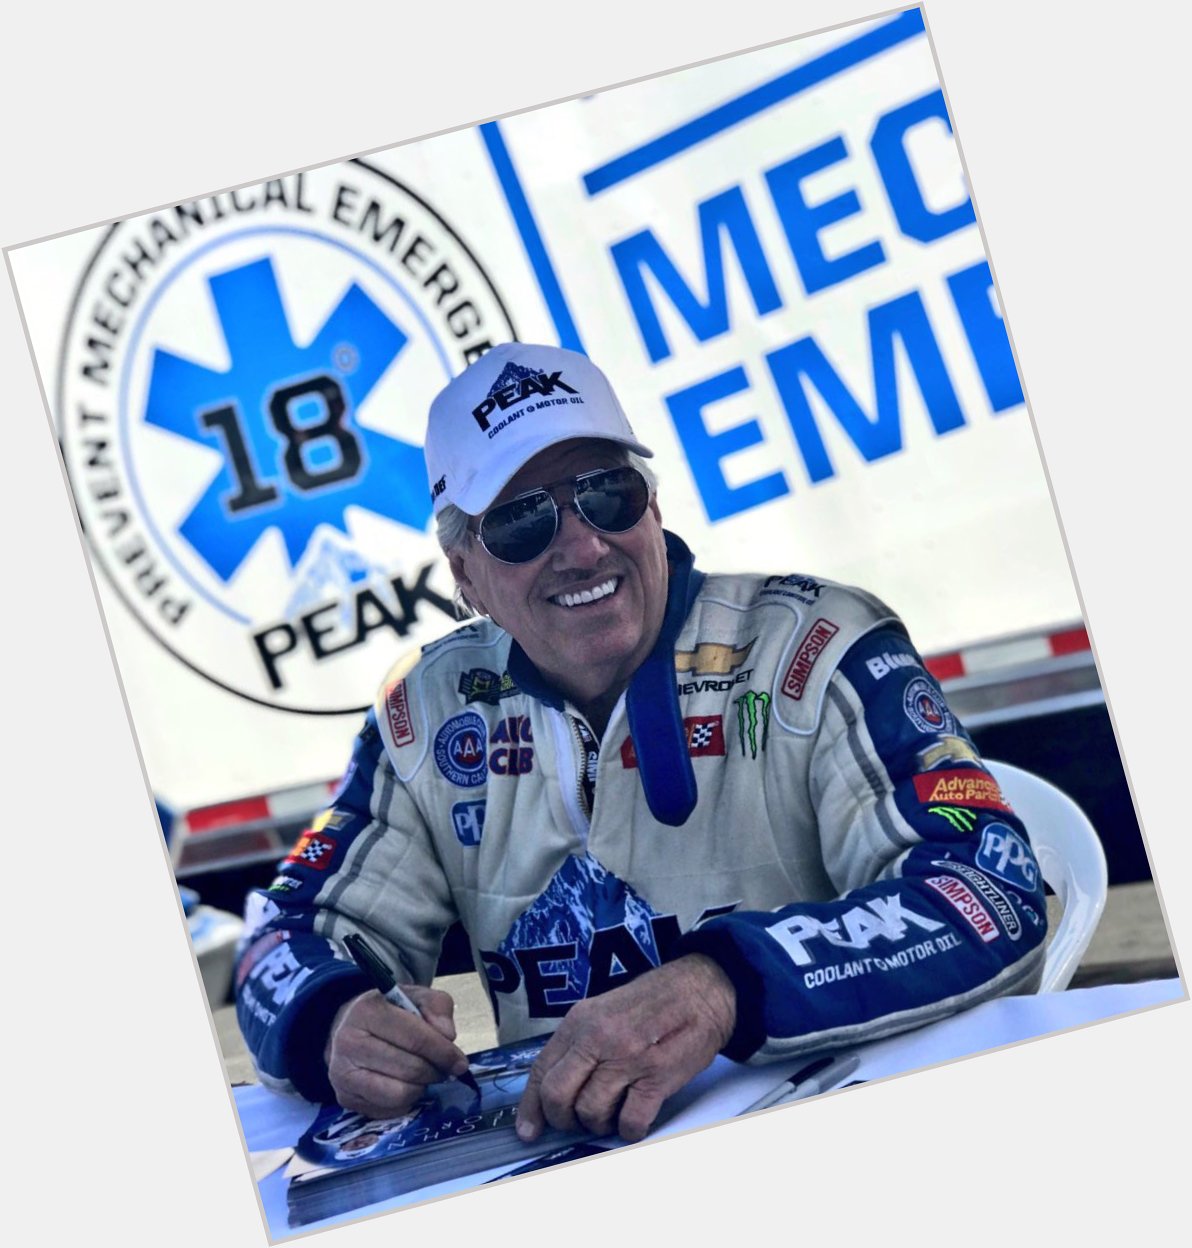 Everybody wish John Force a Happy Birthday. He said he wants his fans to buy some PEAK for his birthday 